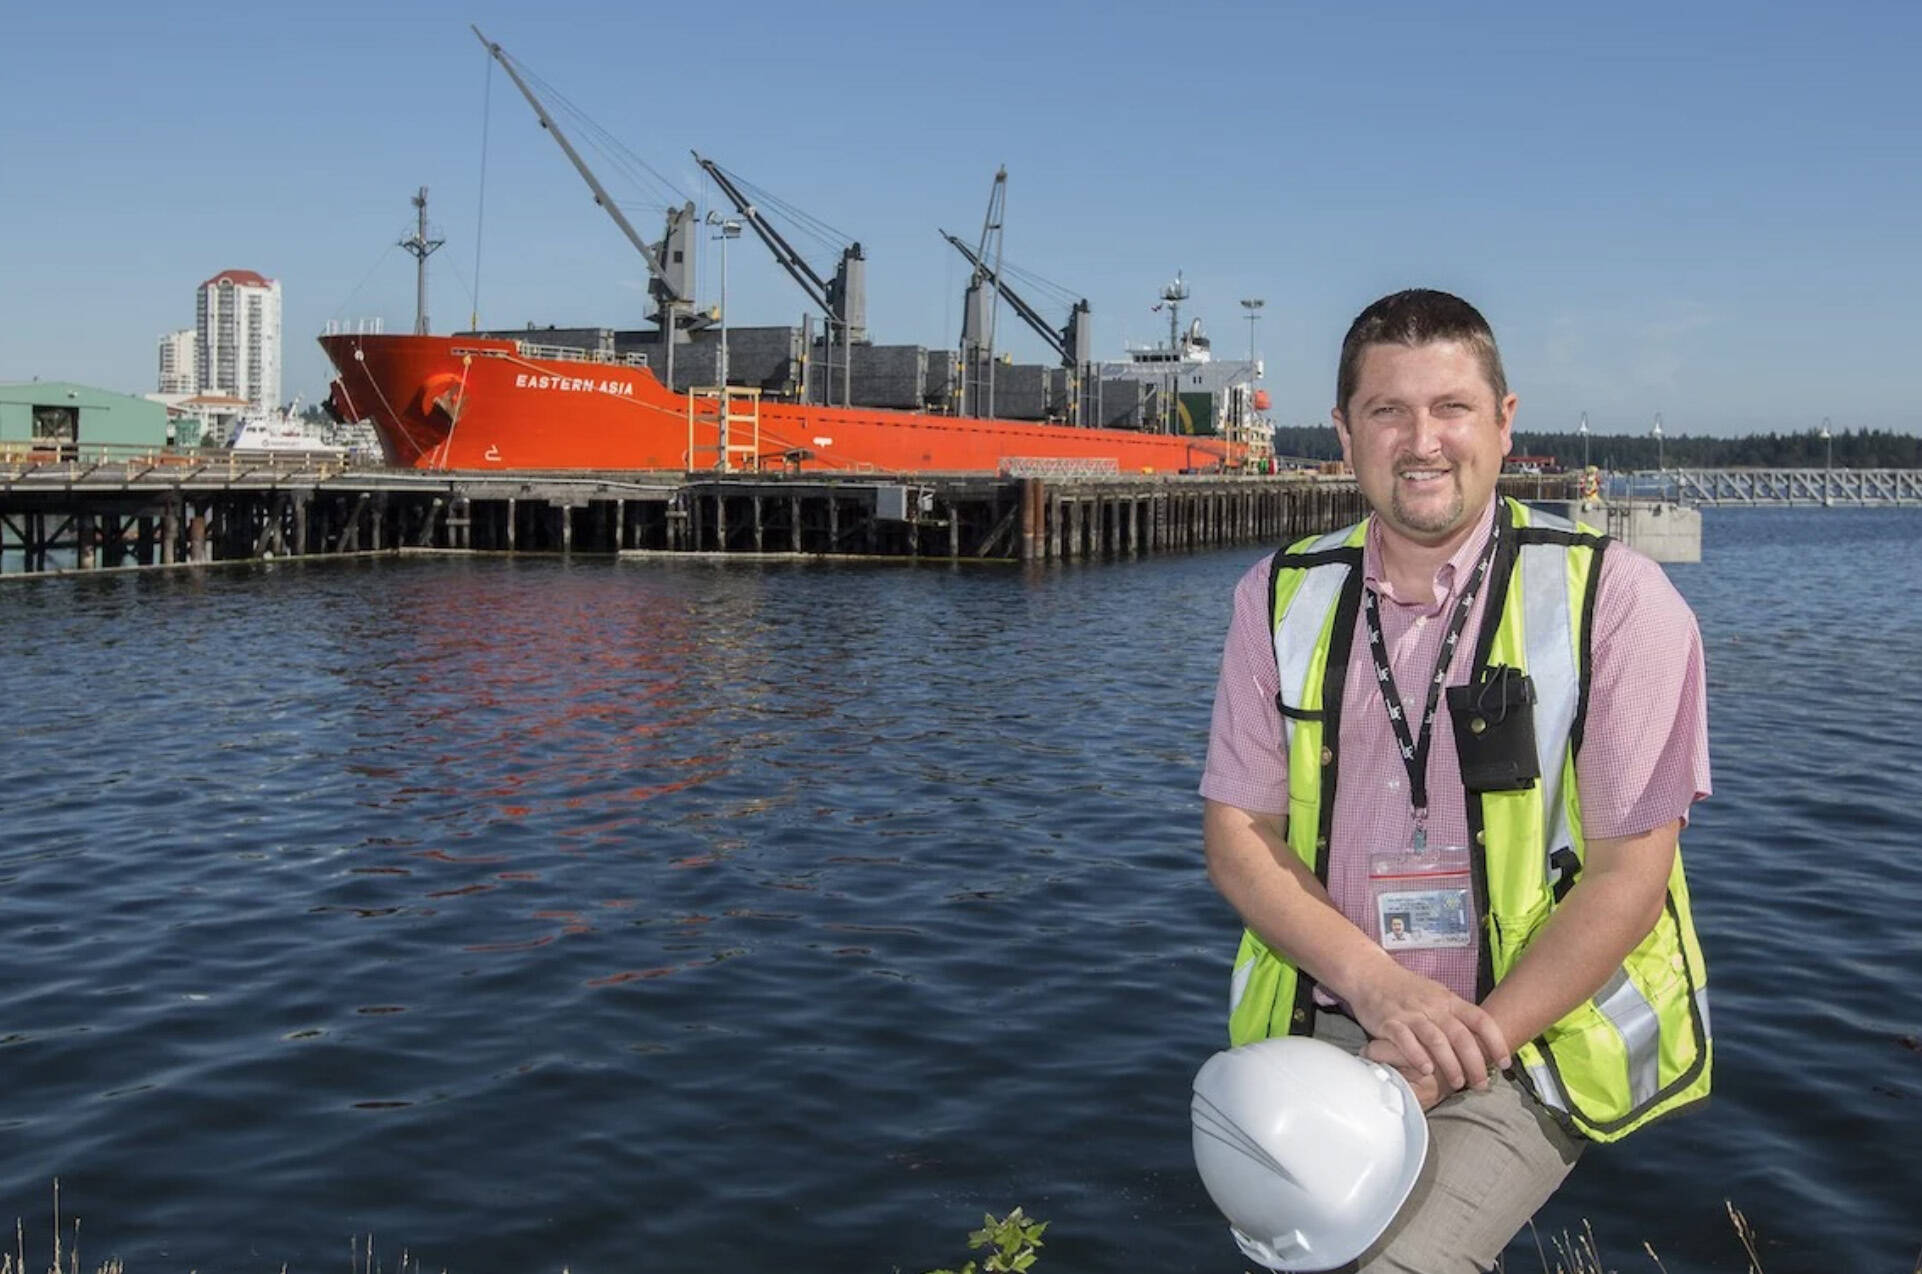 A feasibility study will see if the expansion of the Duke Point Terminal will boost Vancouver Island’s supply chain resiliency, said Jason Michell, vice-president of business development at Nanaimo Port Authority. Photo Dave Roels / NPA